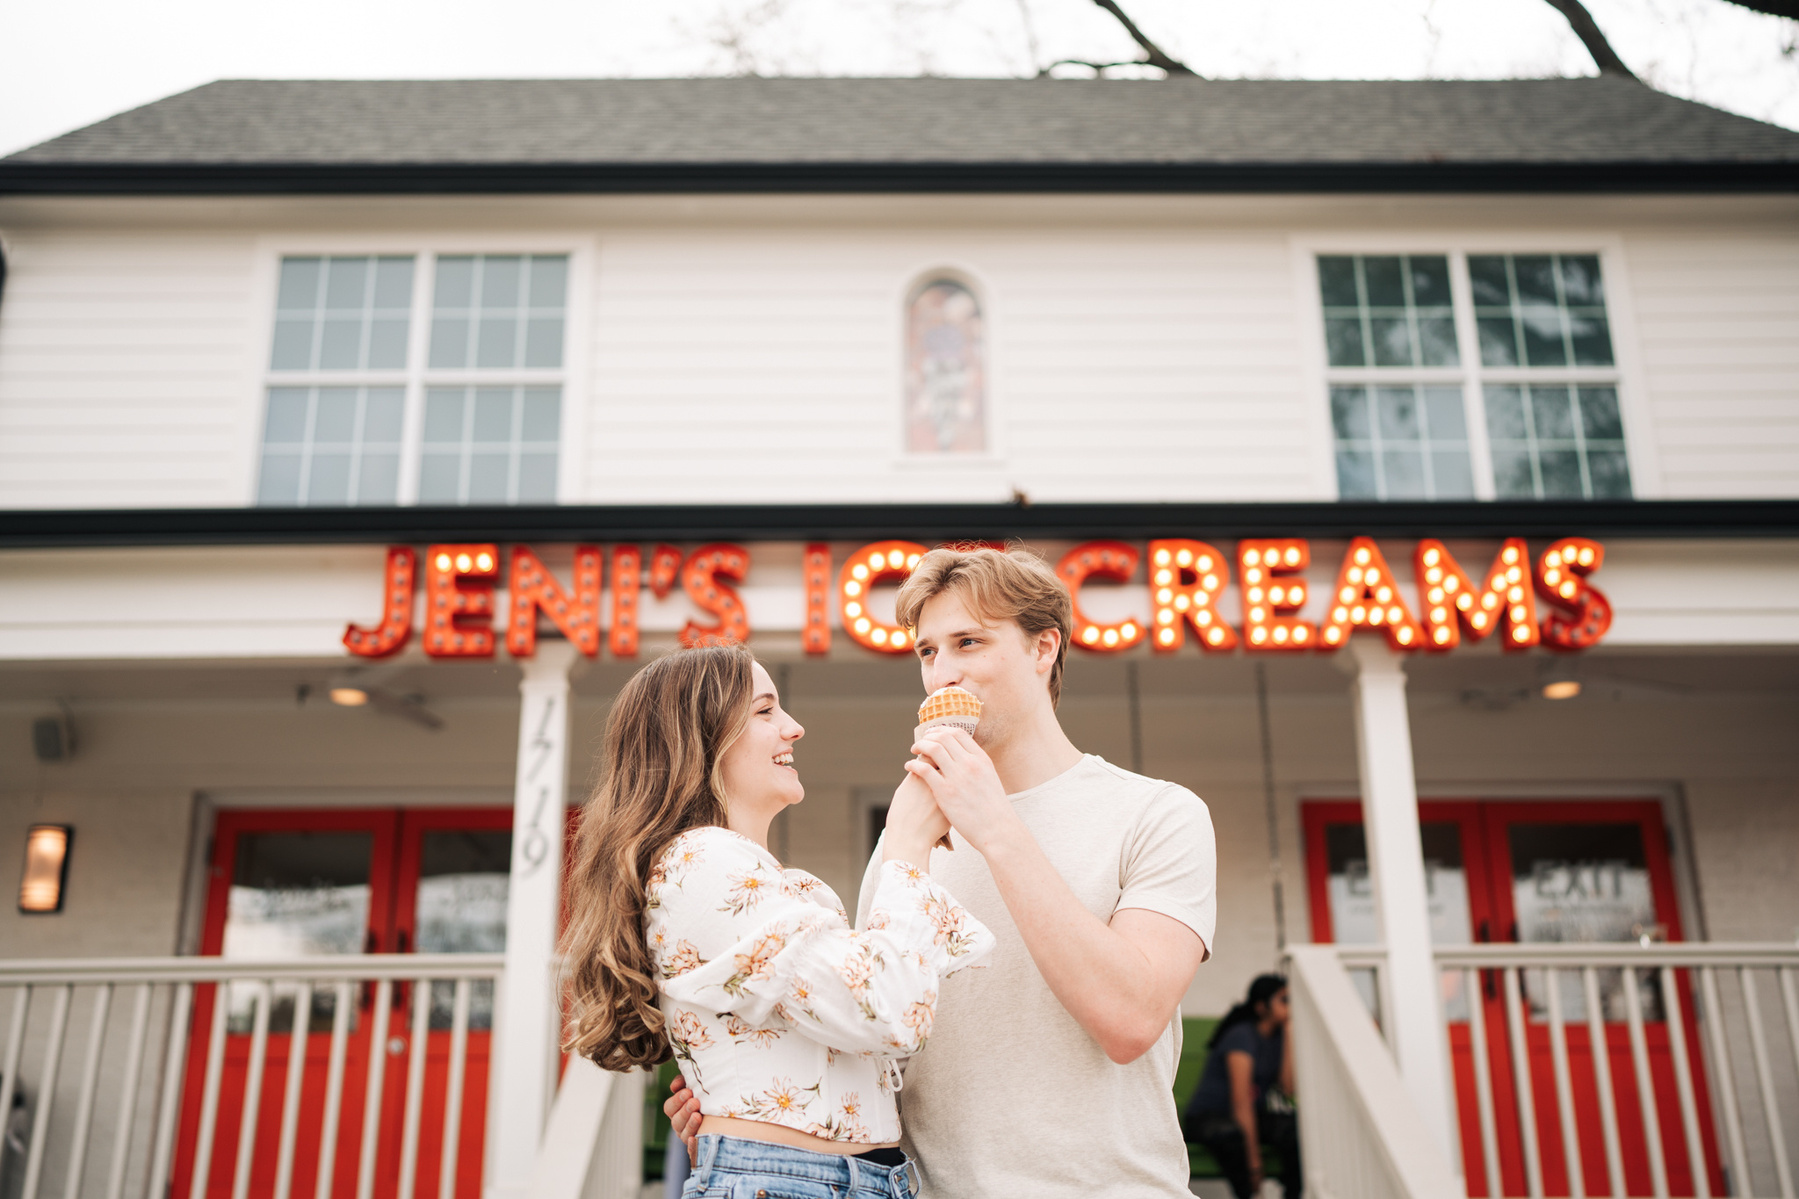 Engagement session for a couple in Houston, TX